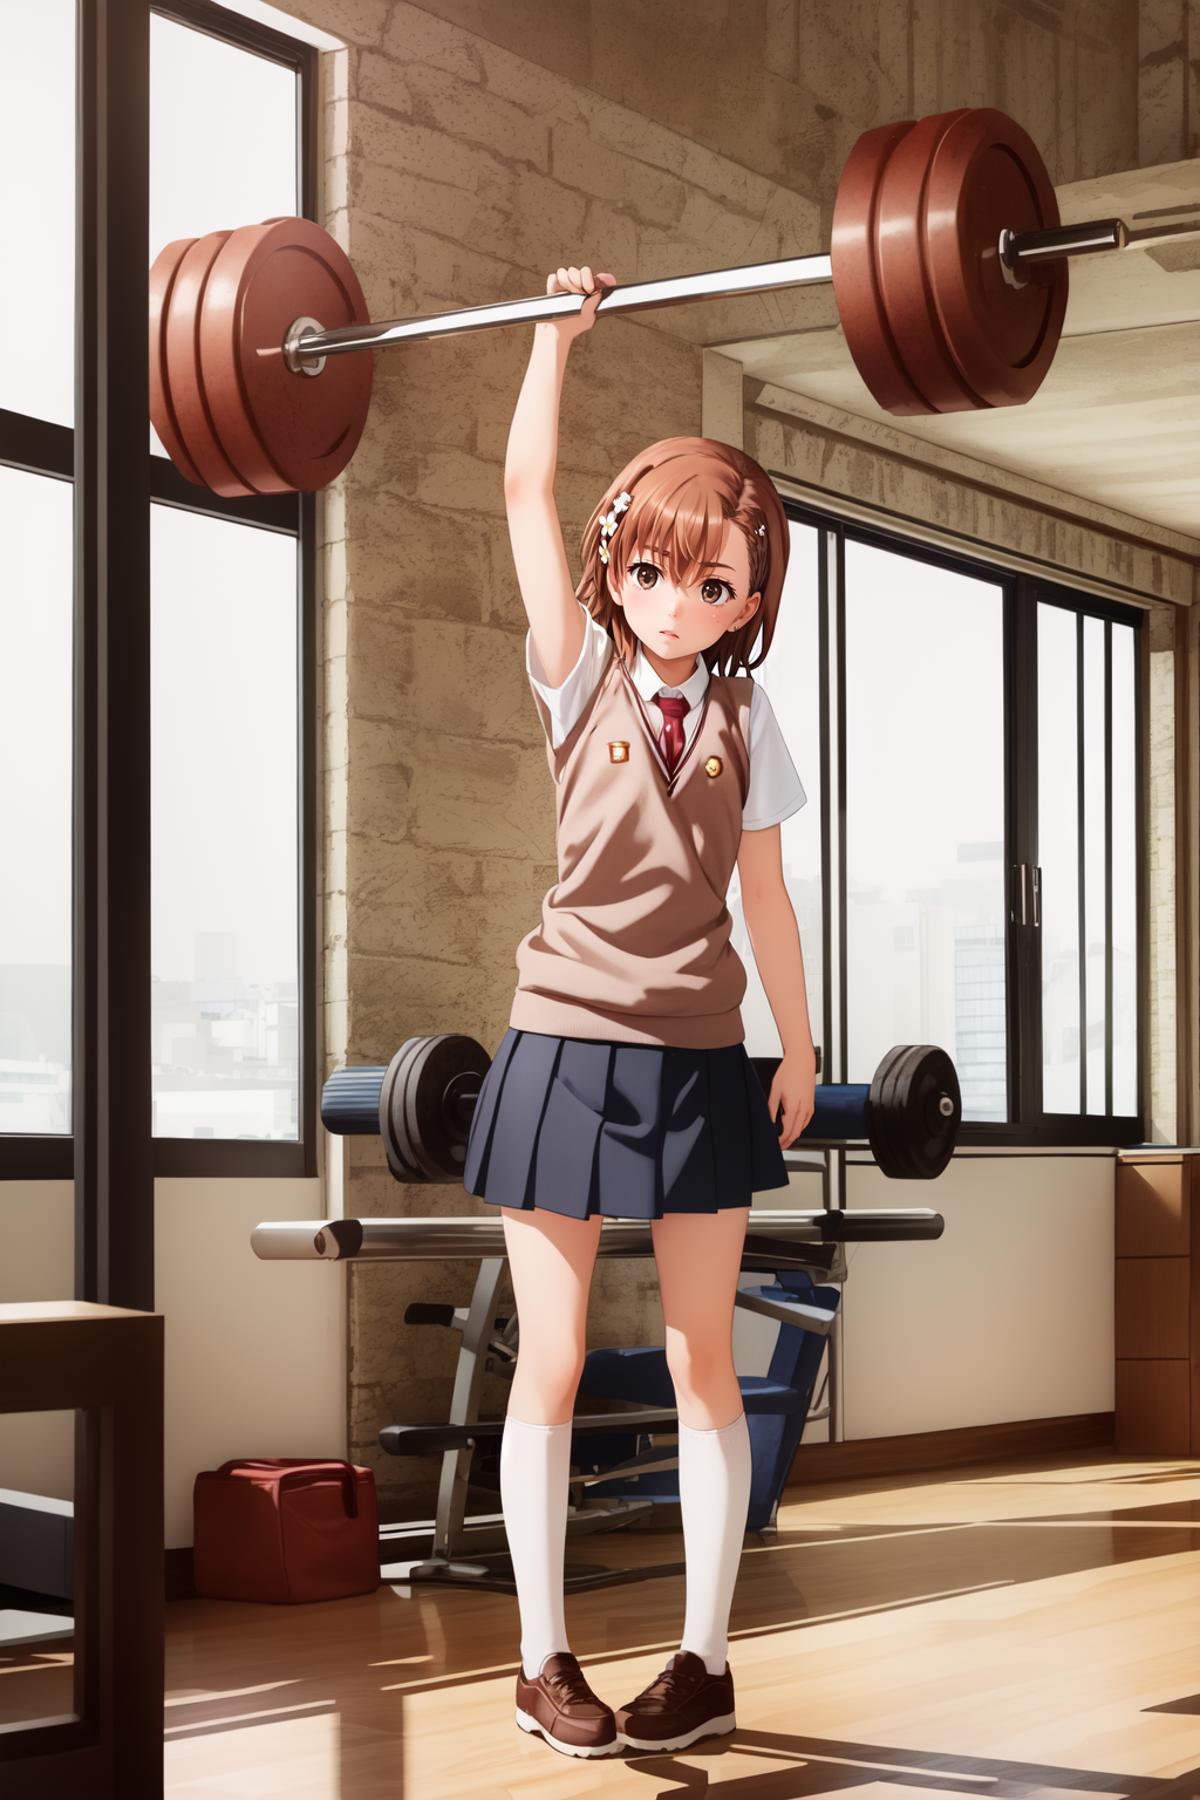 A young girl lifting a barbell in a gym.